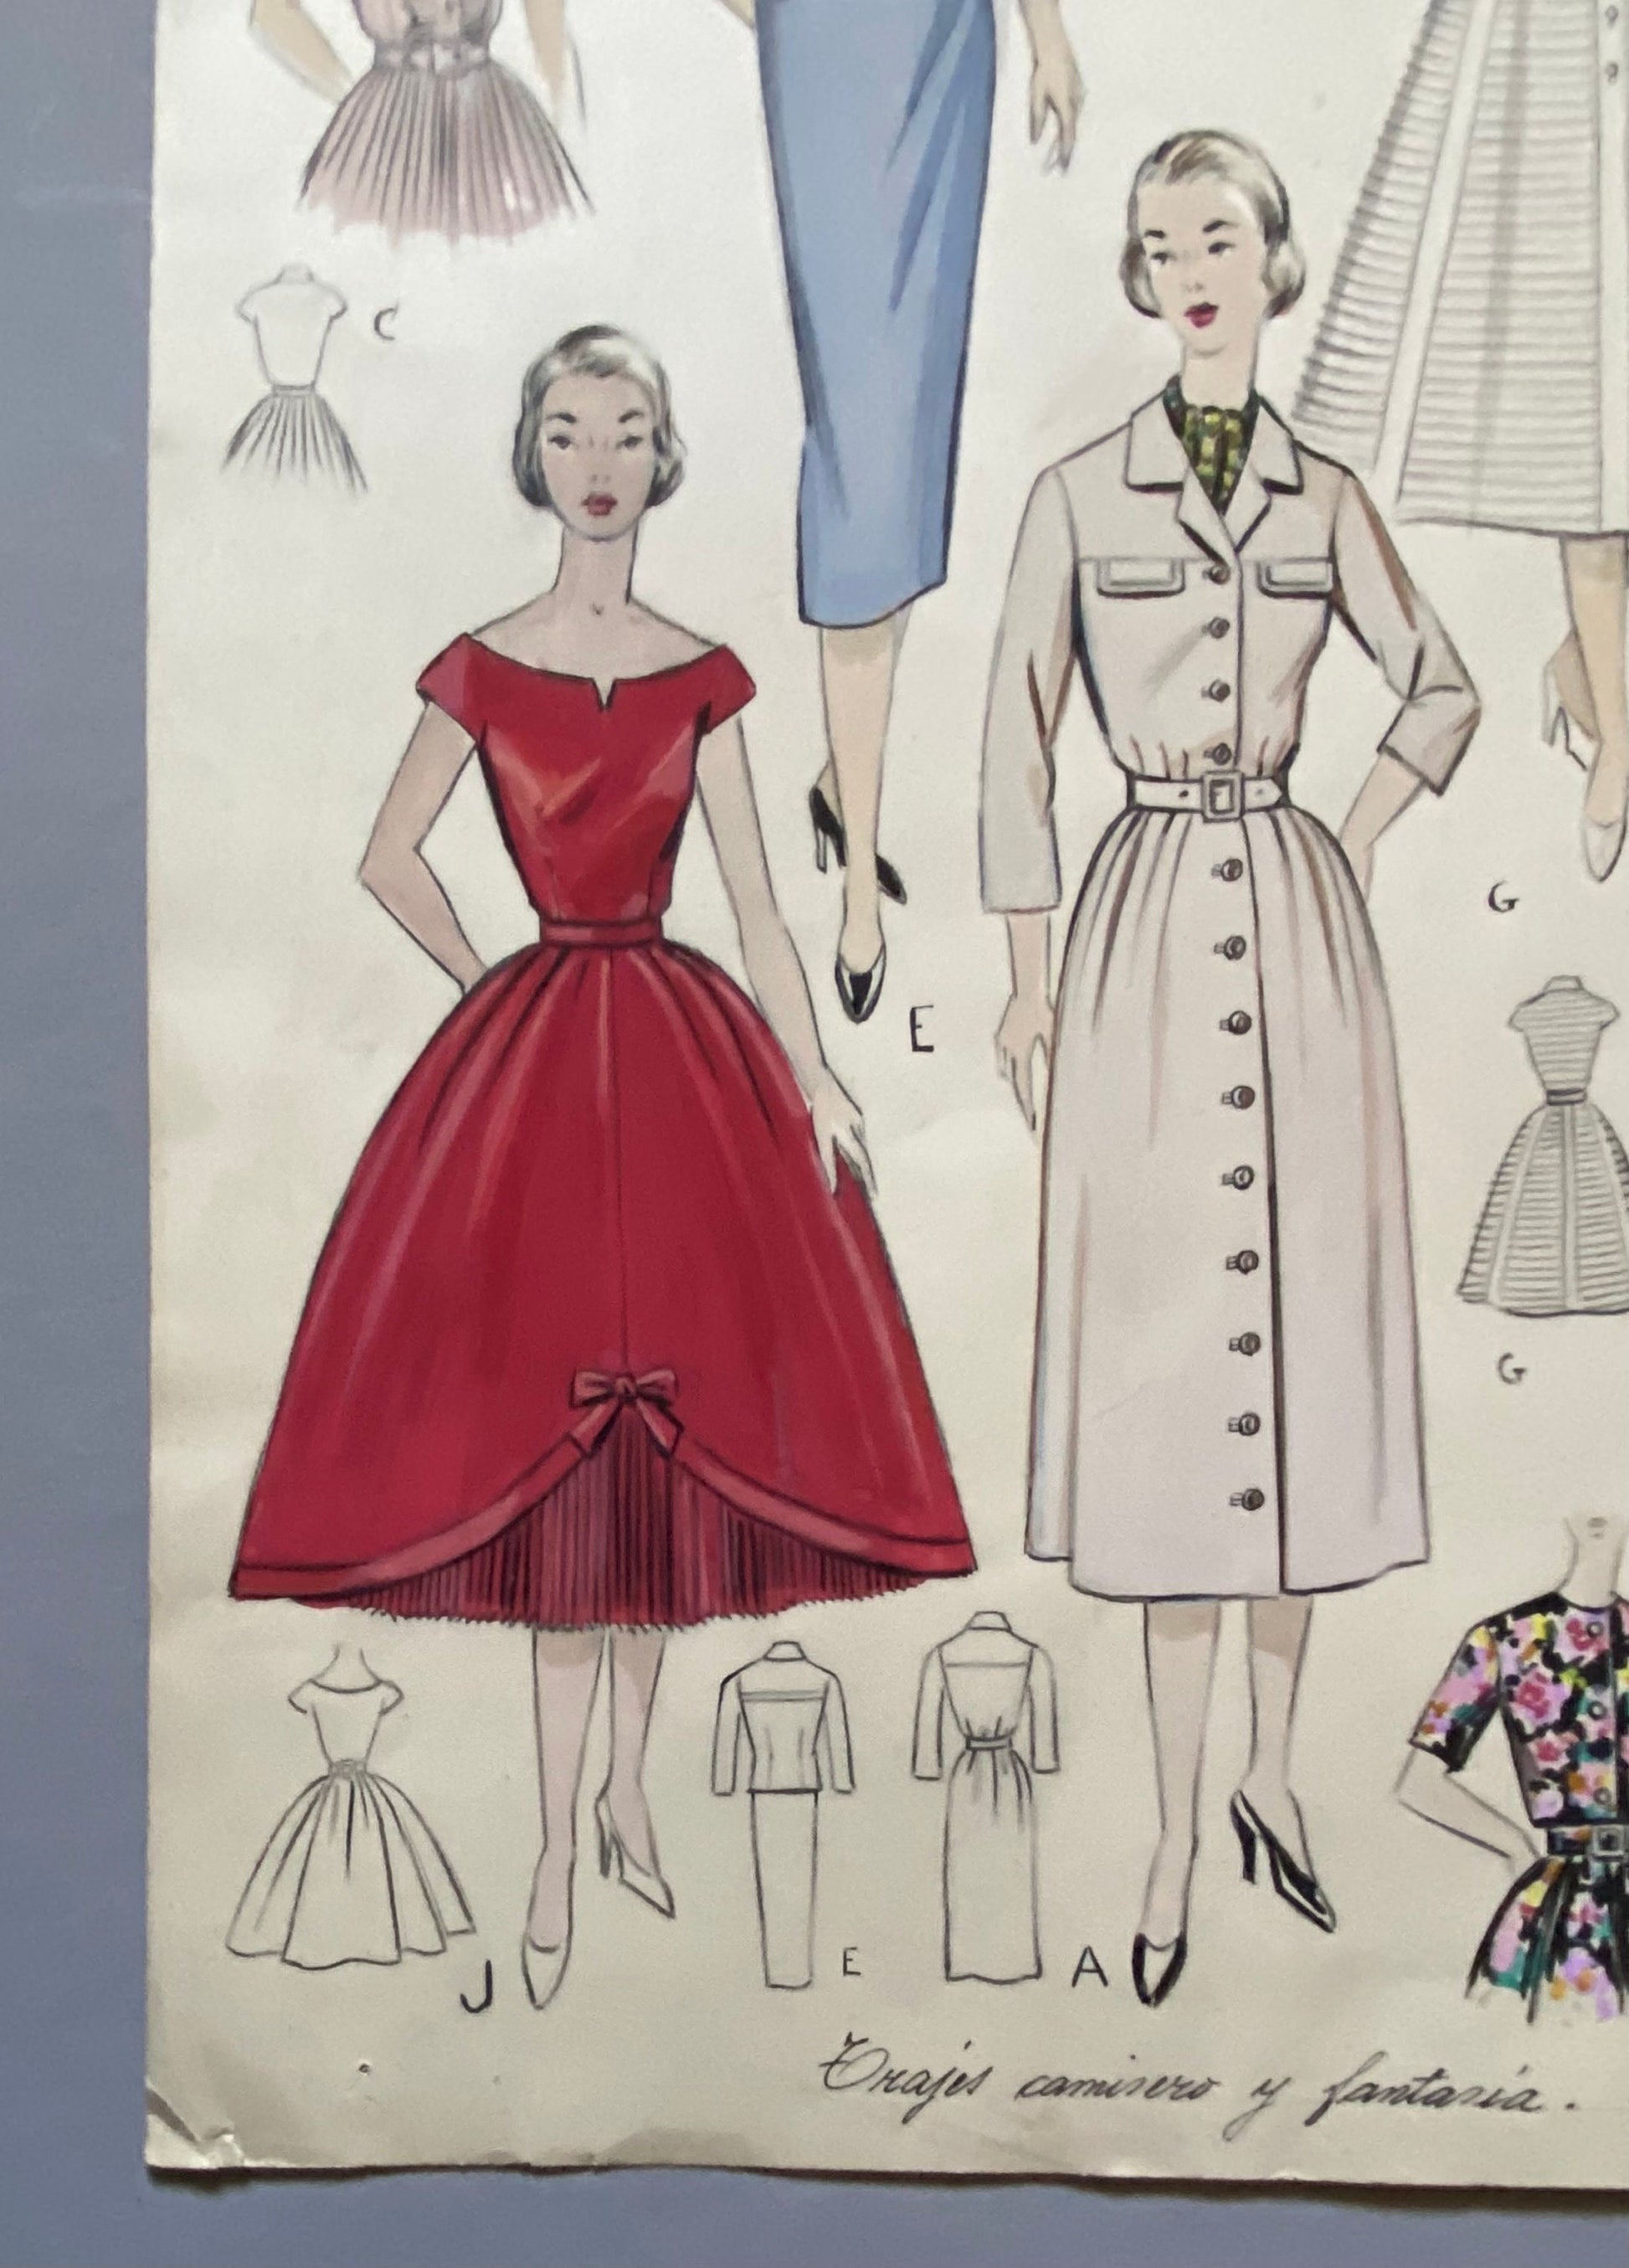 A Large Hand Drawn and Hand Painted Fashion Illustration. Spanish. From Barcelona. 1957 - 1958. Size: 52 x 41.5 cms.